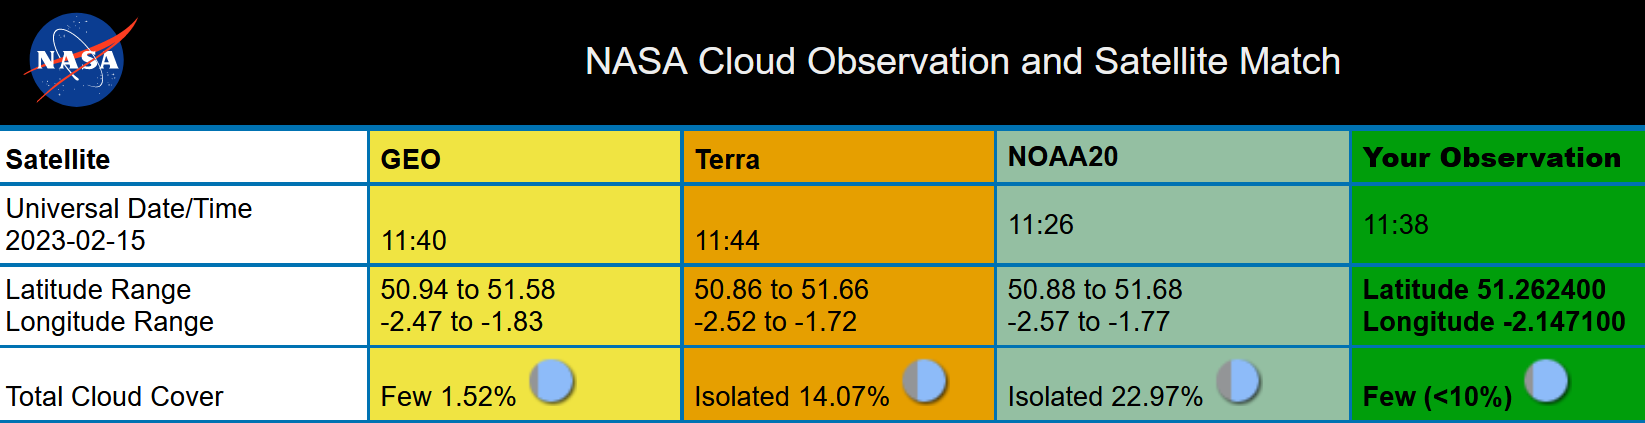 First section of NASA Cloud Observation and Satellite Match table, consisting of four rows and five columns. The first row is for the satellite name. In this example, the user's observation is being compared to GEO, Terra, and NOAA-20. Then universal date/time is shown, latitude and longitude ranges and total cloud cover